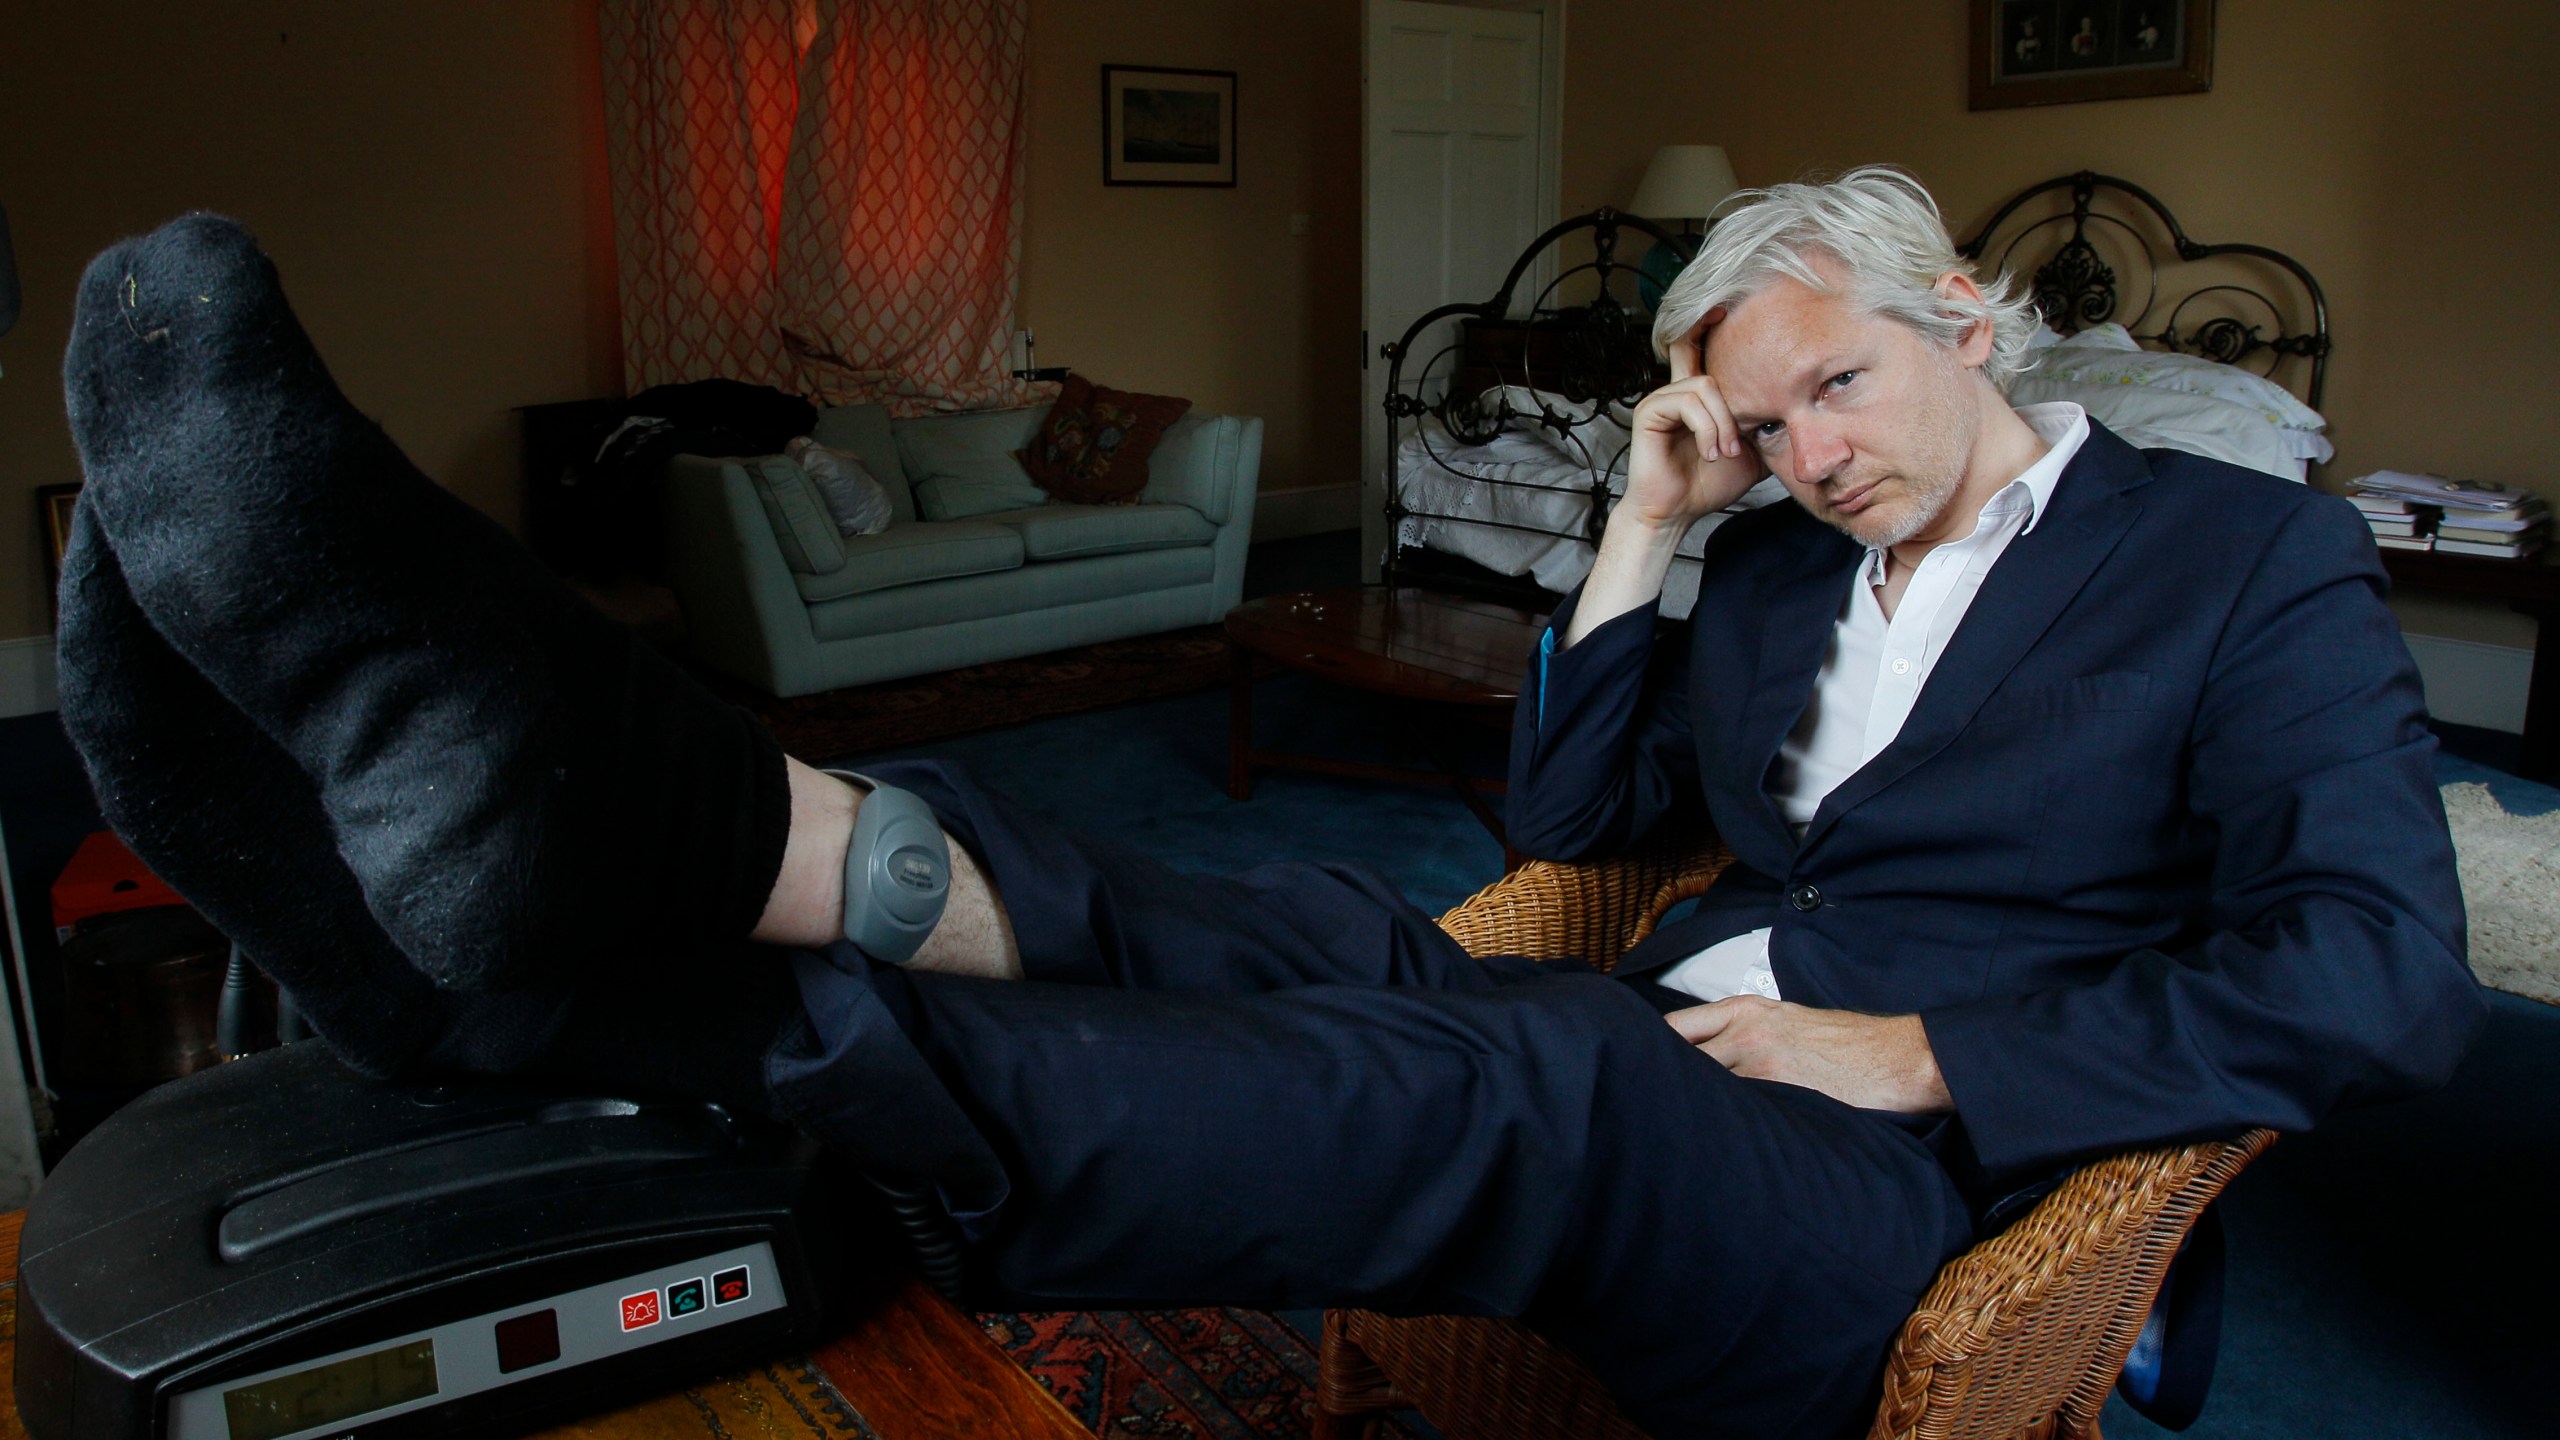 FILE - WikiLeaks founder Julian Assange is seen with his ankle security tag at the house where he is required to stay, near Bungay, England, Wednesday, June 15, 2011. Assange will plead guilty to a felony charge in a deal with the U.S. Justice Department that will free him from prison and resolve a long-running legal saga over the publication of a trove of classified documents. (AP Photo/Kirsty Wigglesworth, File)